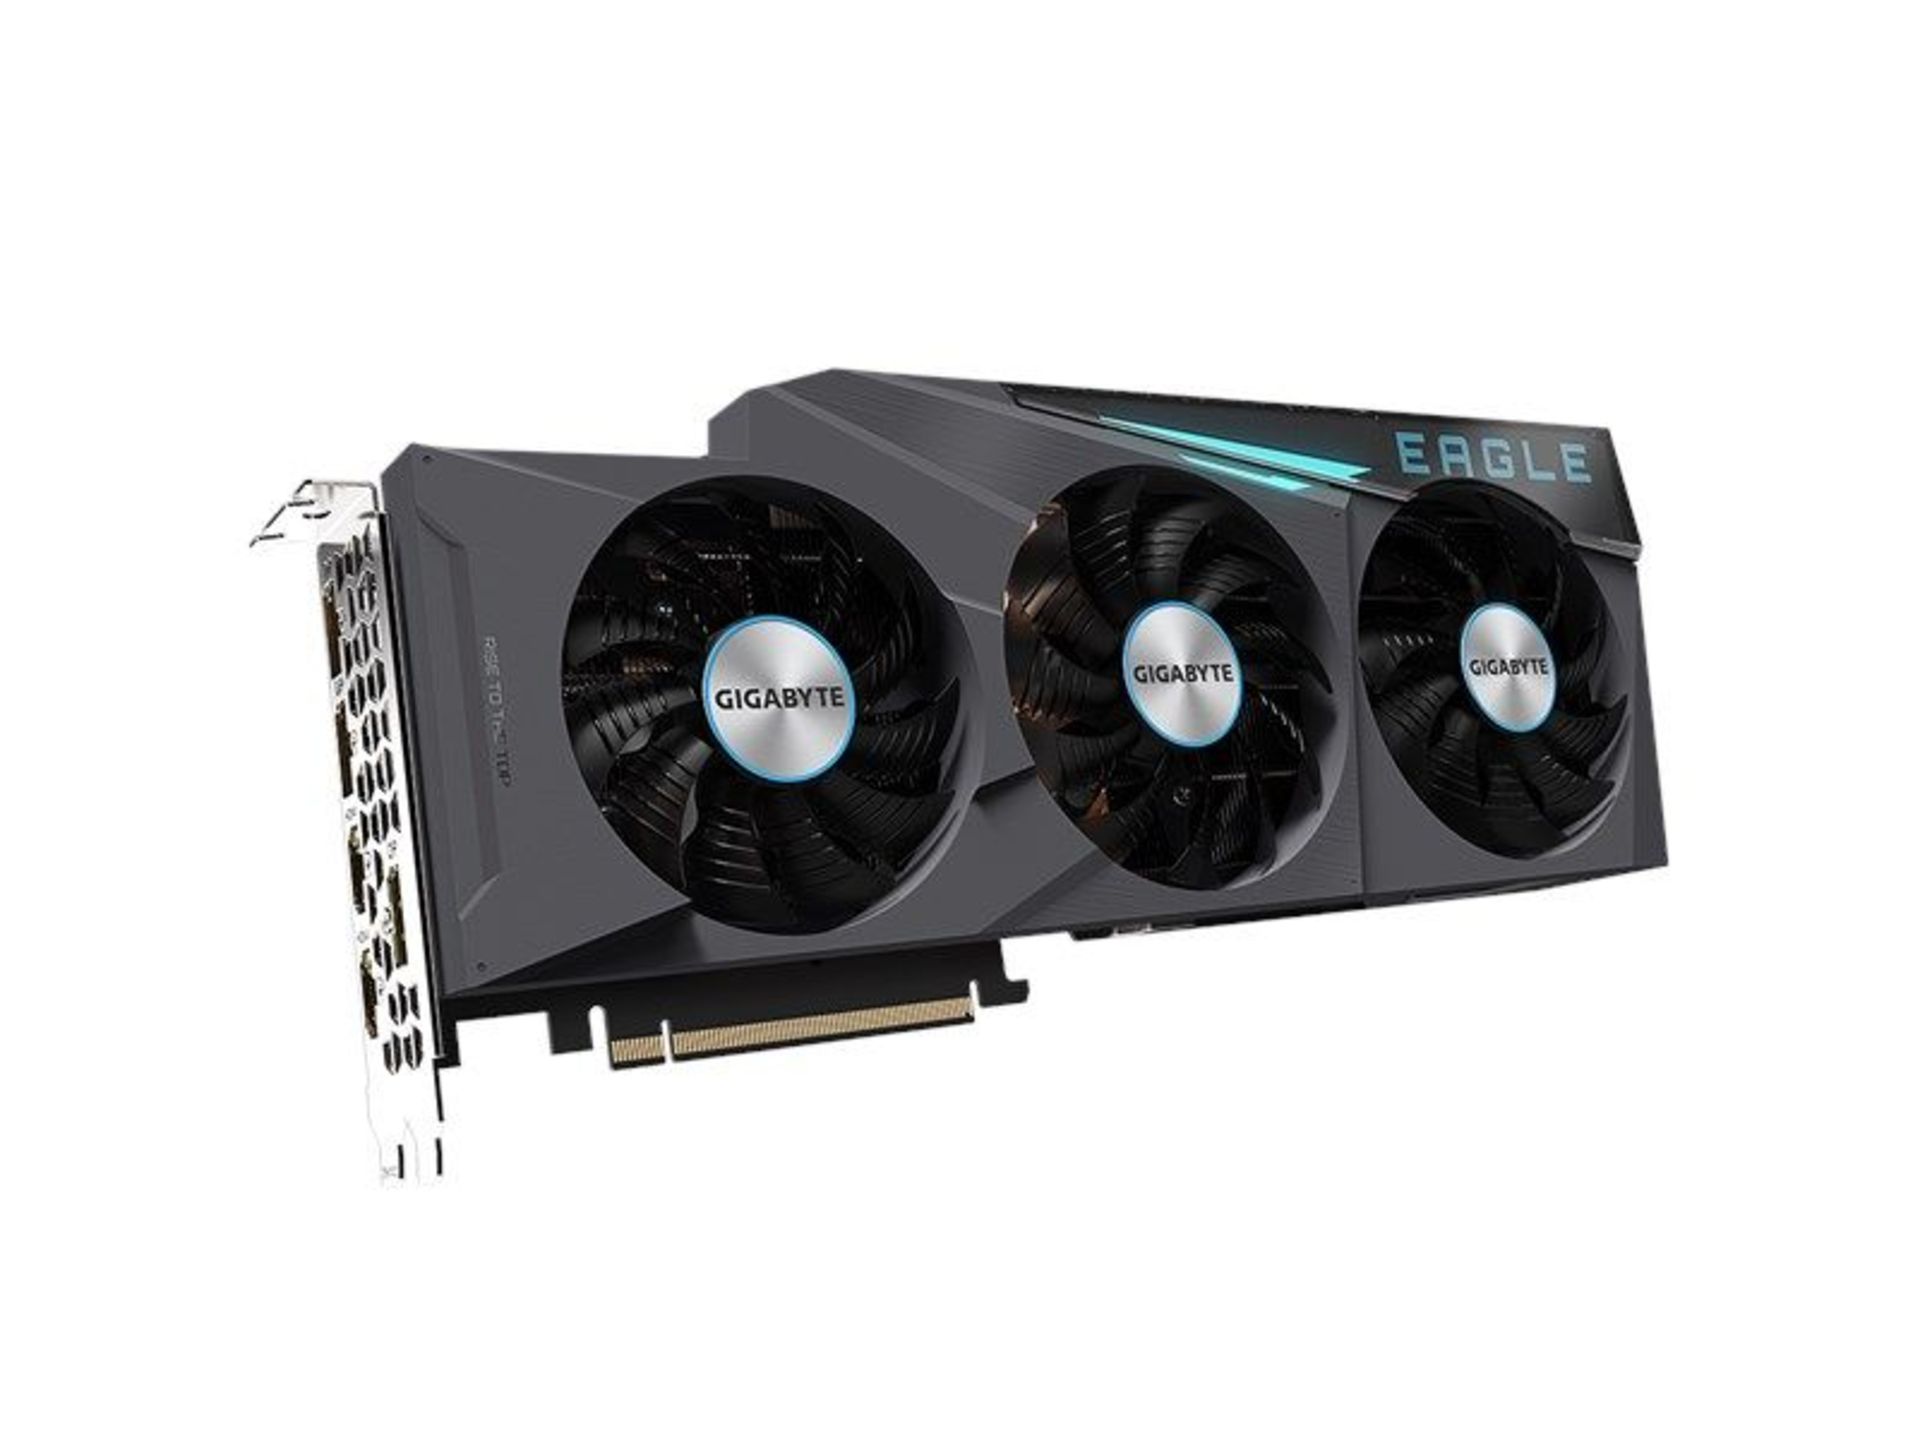 Gigabyte GeForce RTX 3080 EAGLE 10GB Graphics Card. - P2. RRP £1,250.00. WINDFORCE 3X cooling system